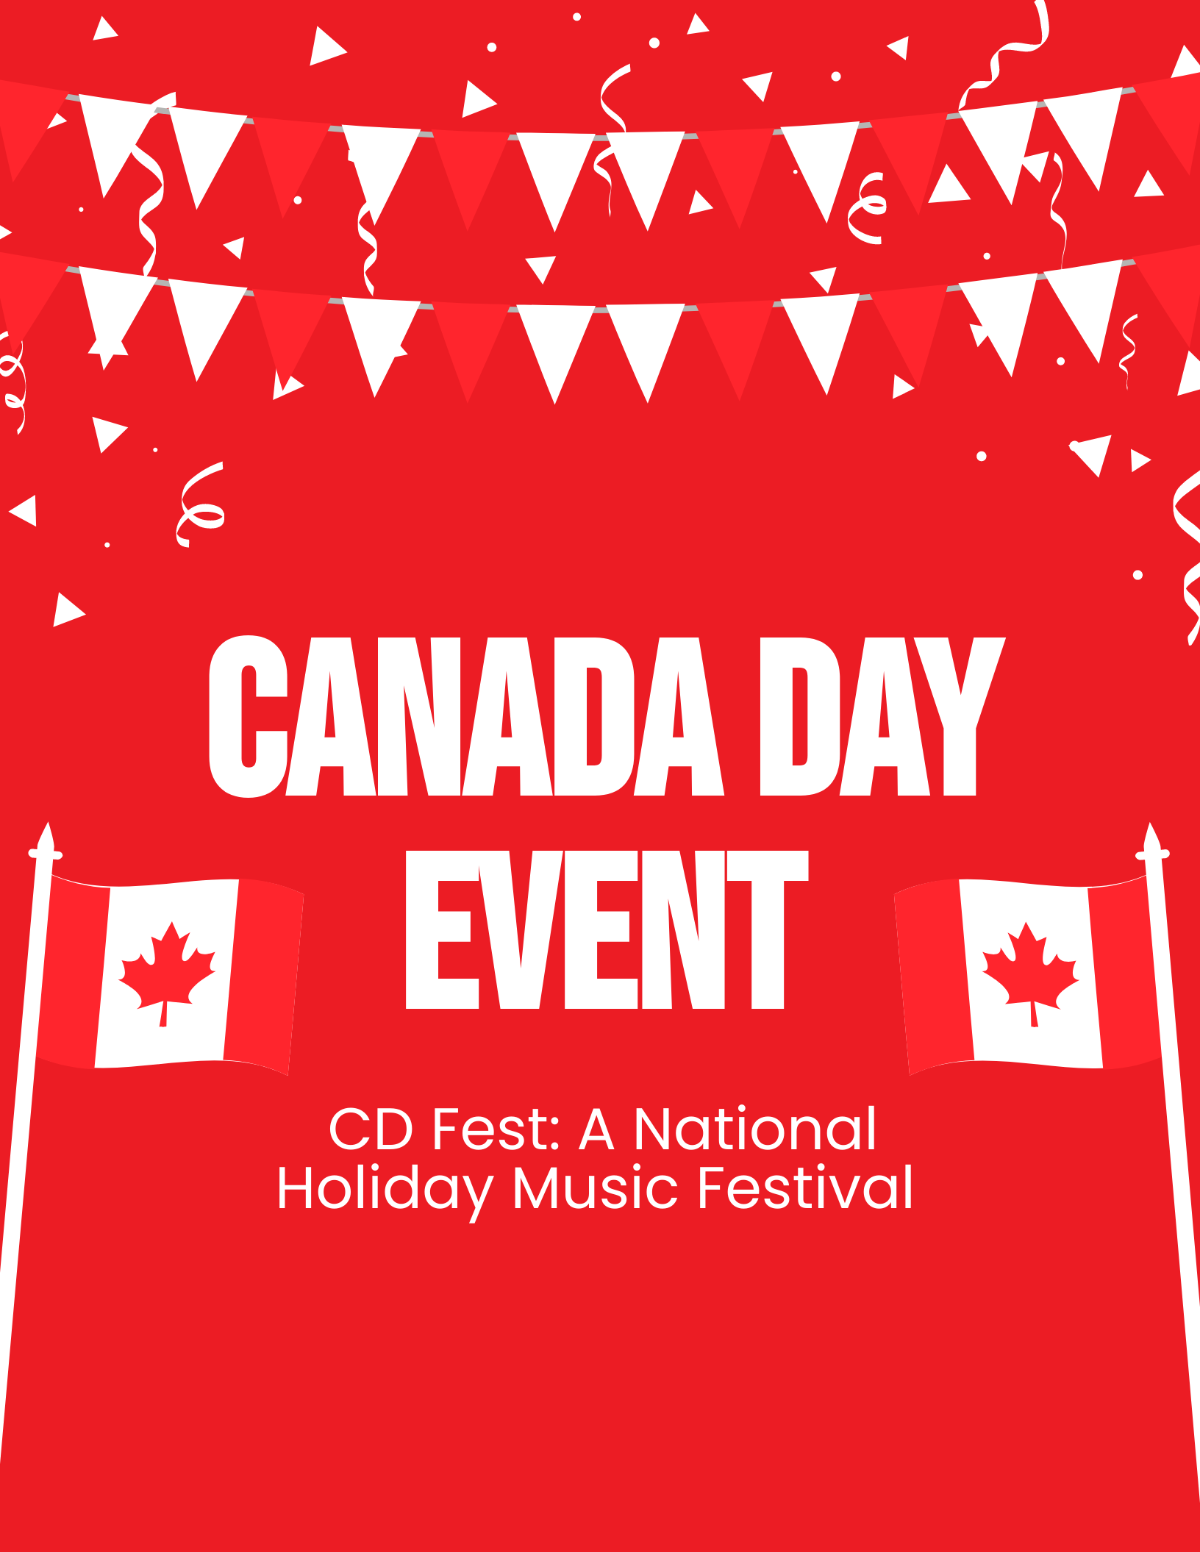 Canada Day Event Flyer